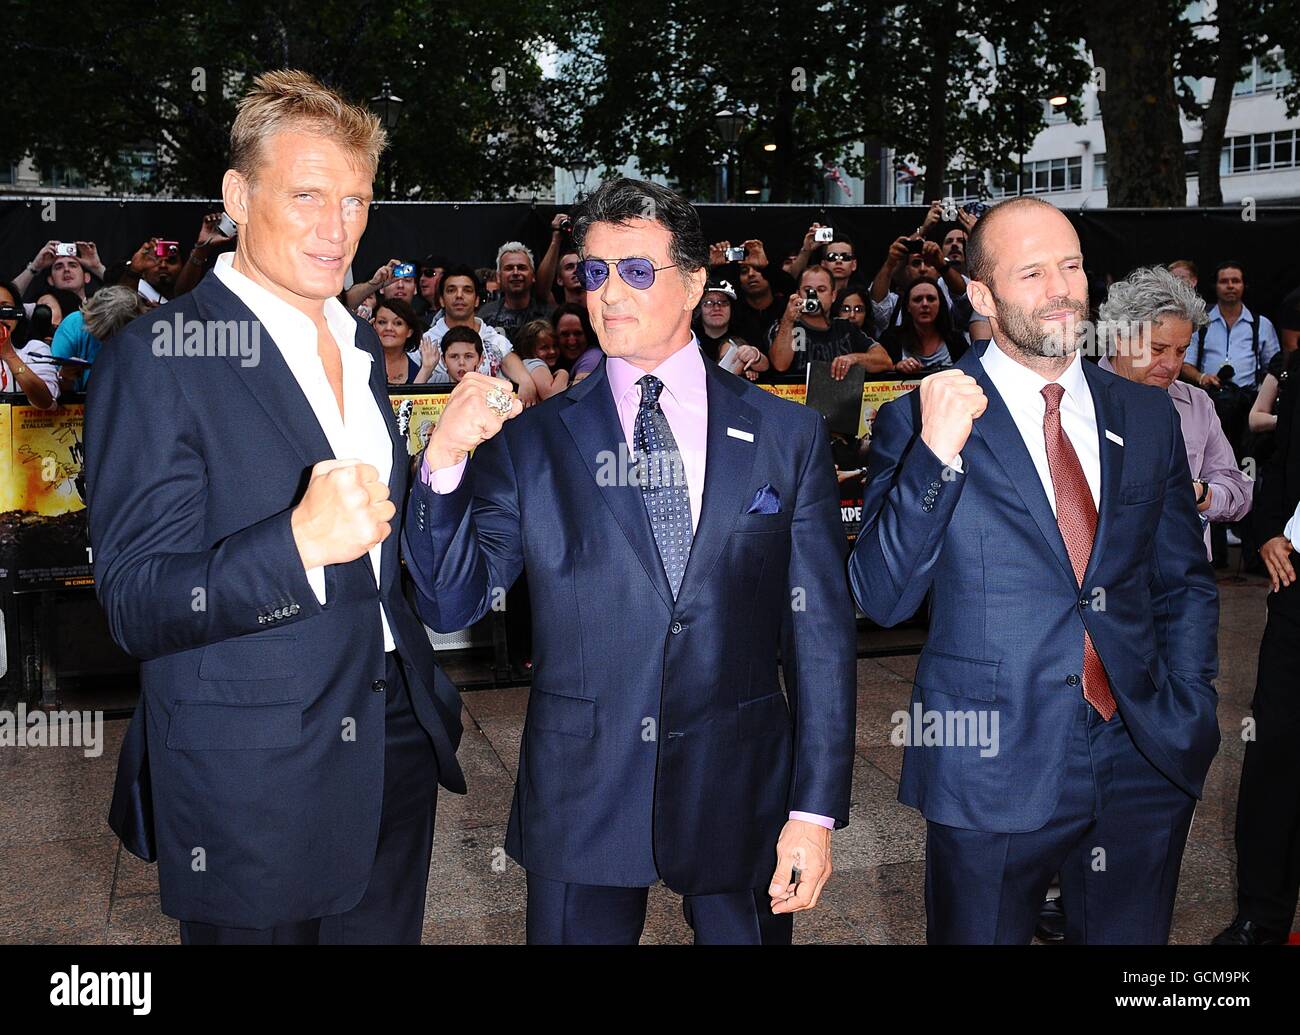 Dolph Lundgren, Sylvester Stallone and Jason Statham (left to right) arriving for the UK premiere of The Expendables at the Odeon, Leicester Square, London. Stock Photo